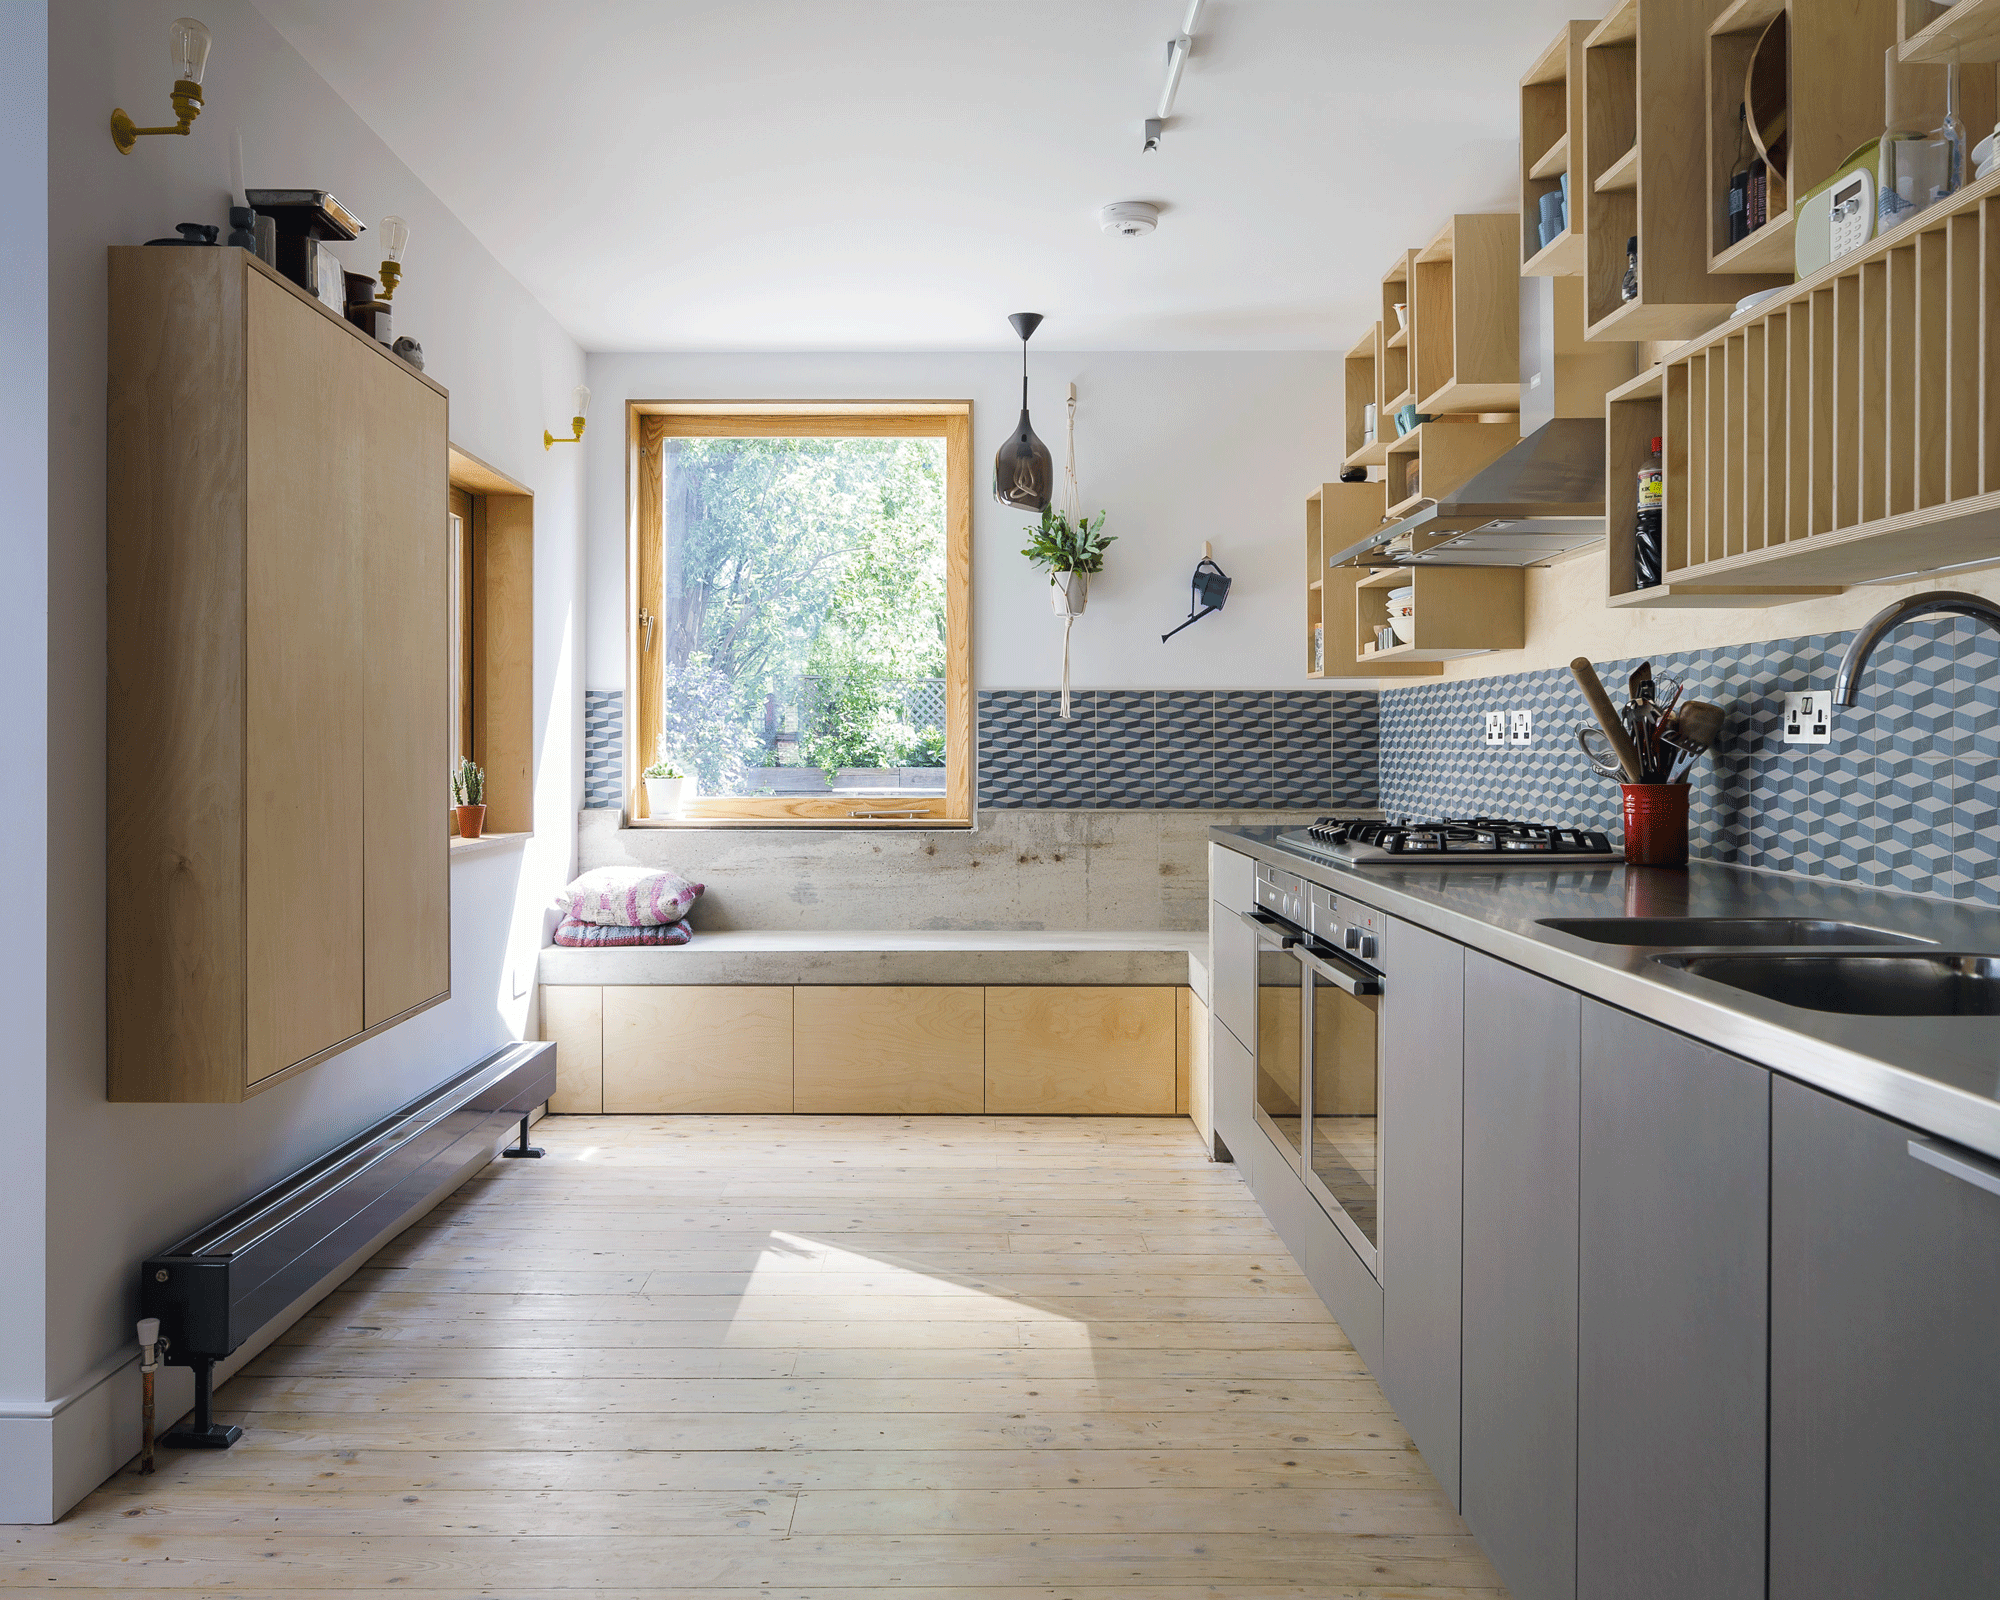 Kitchen with window seating made from a mix of concrete and plywood